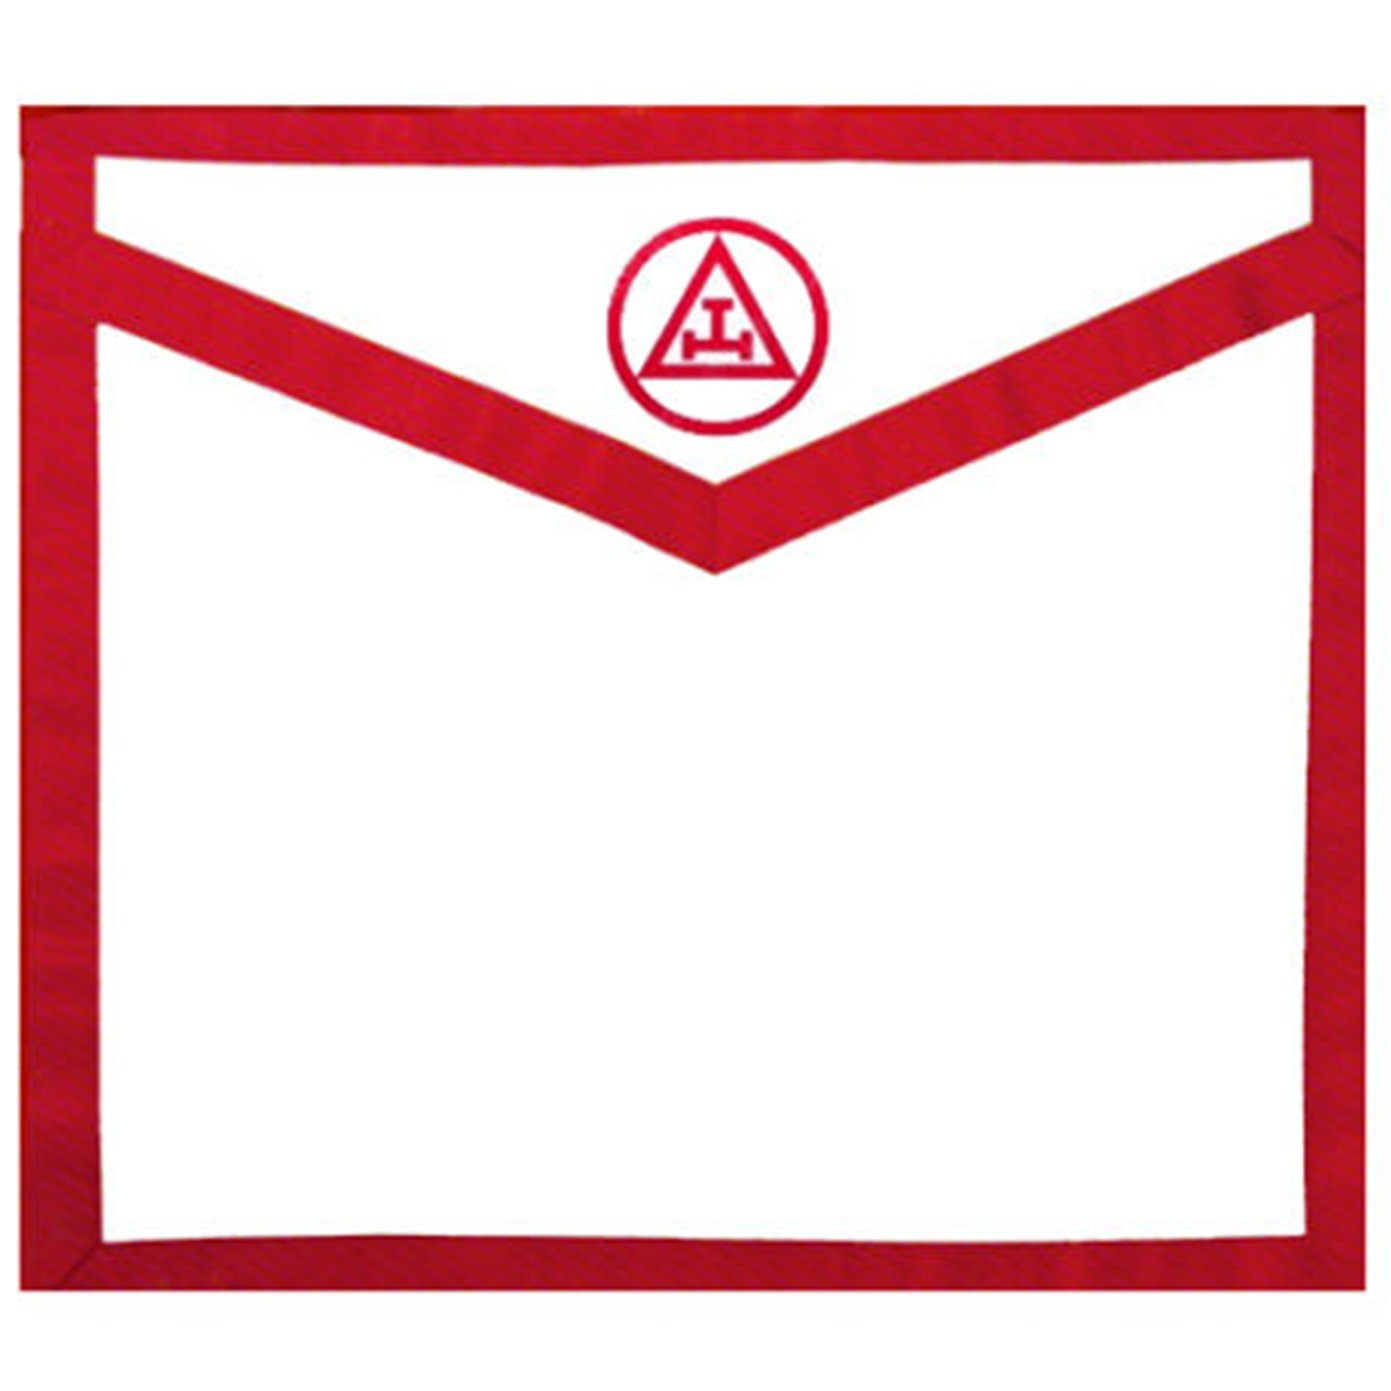 Royal Arch Chapter Apron - White with Red Triple Tau - Bricks Masons